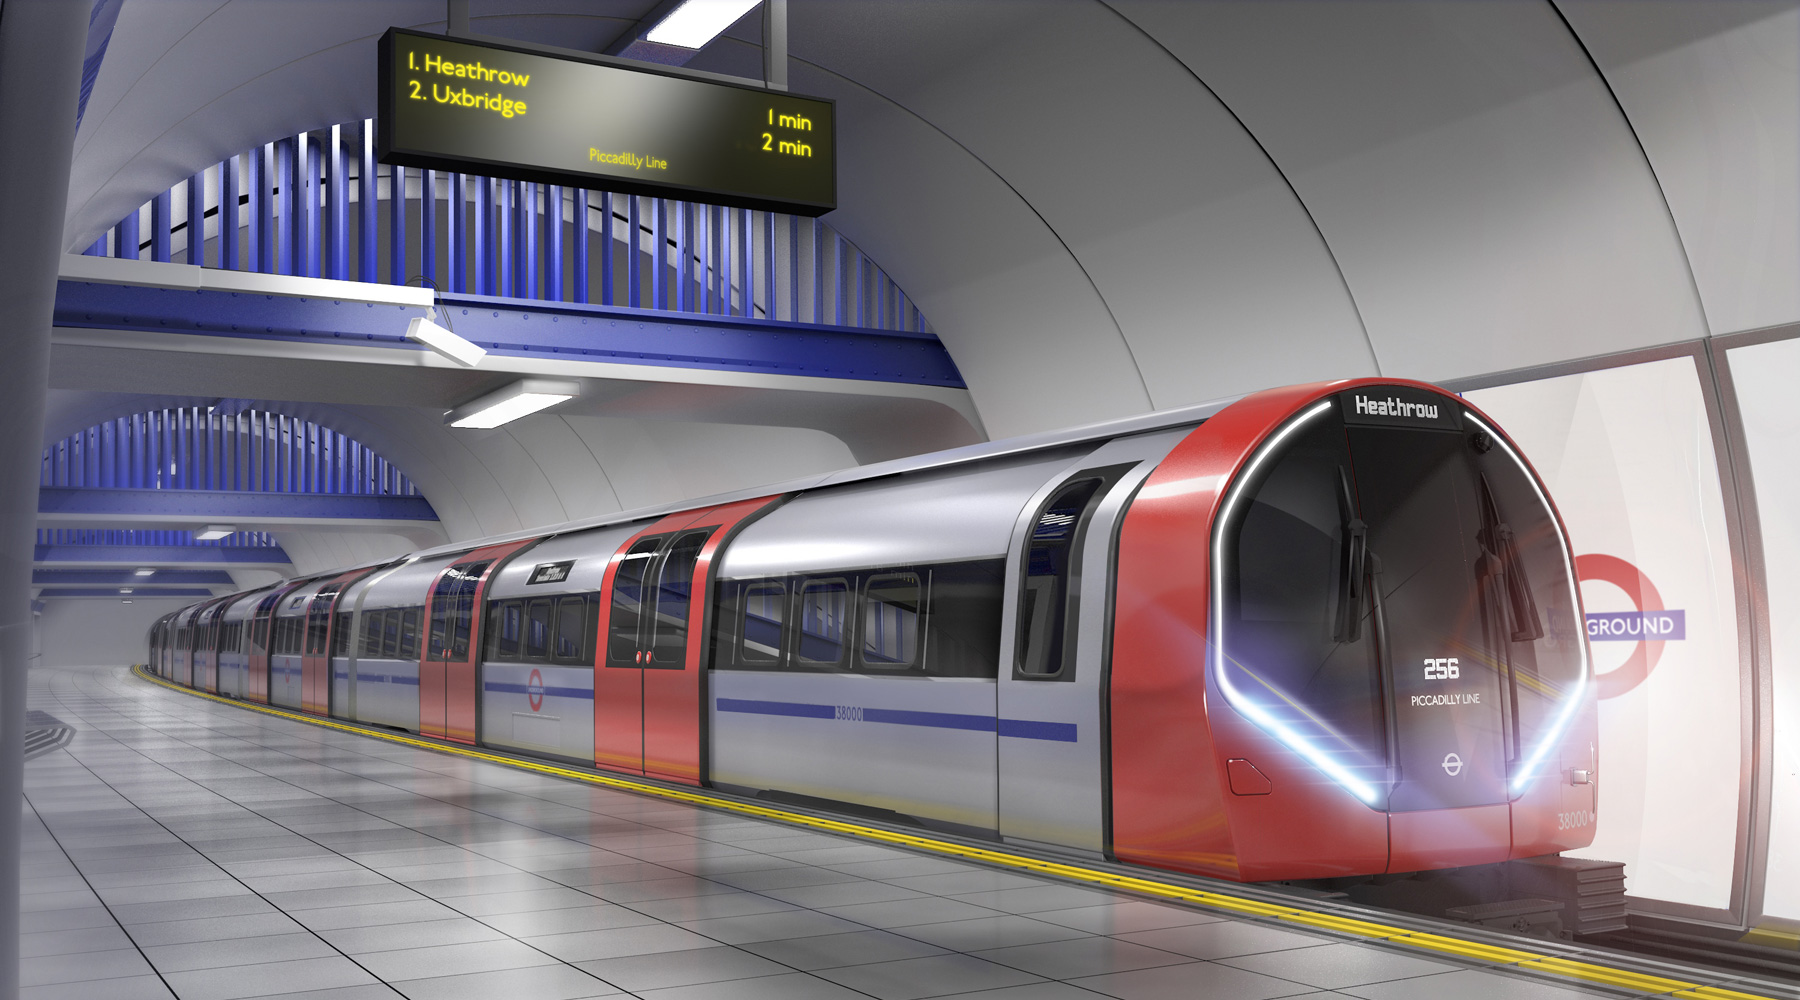 RMT warns of strike action over driverless tube trains